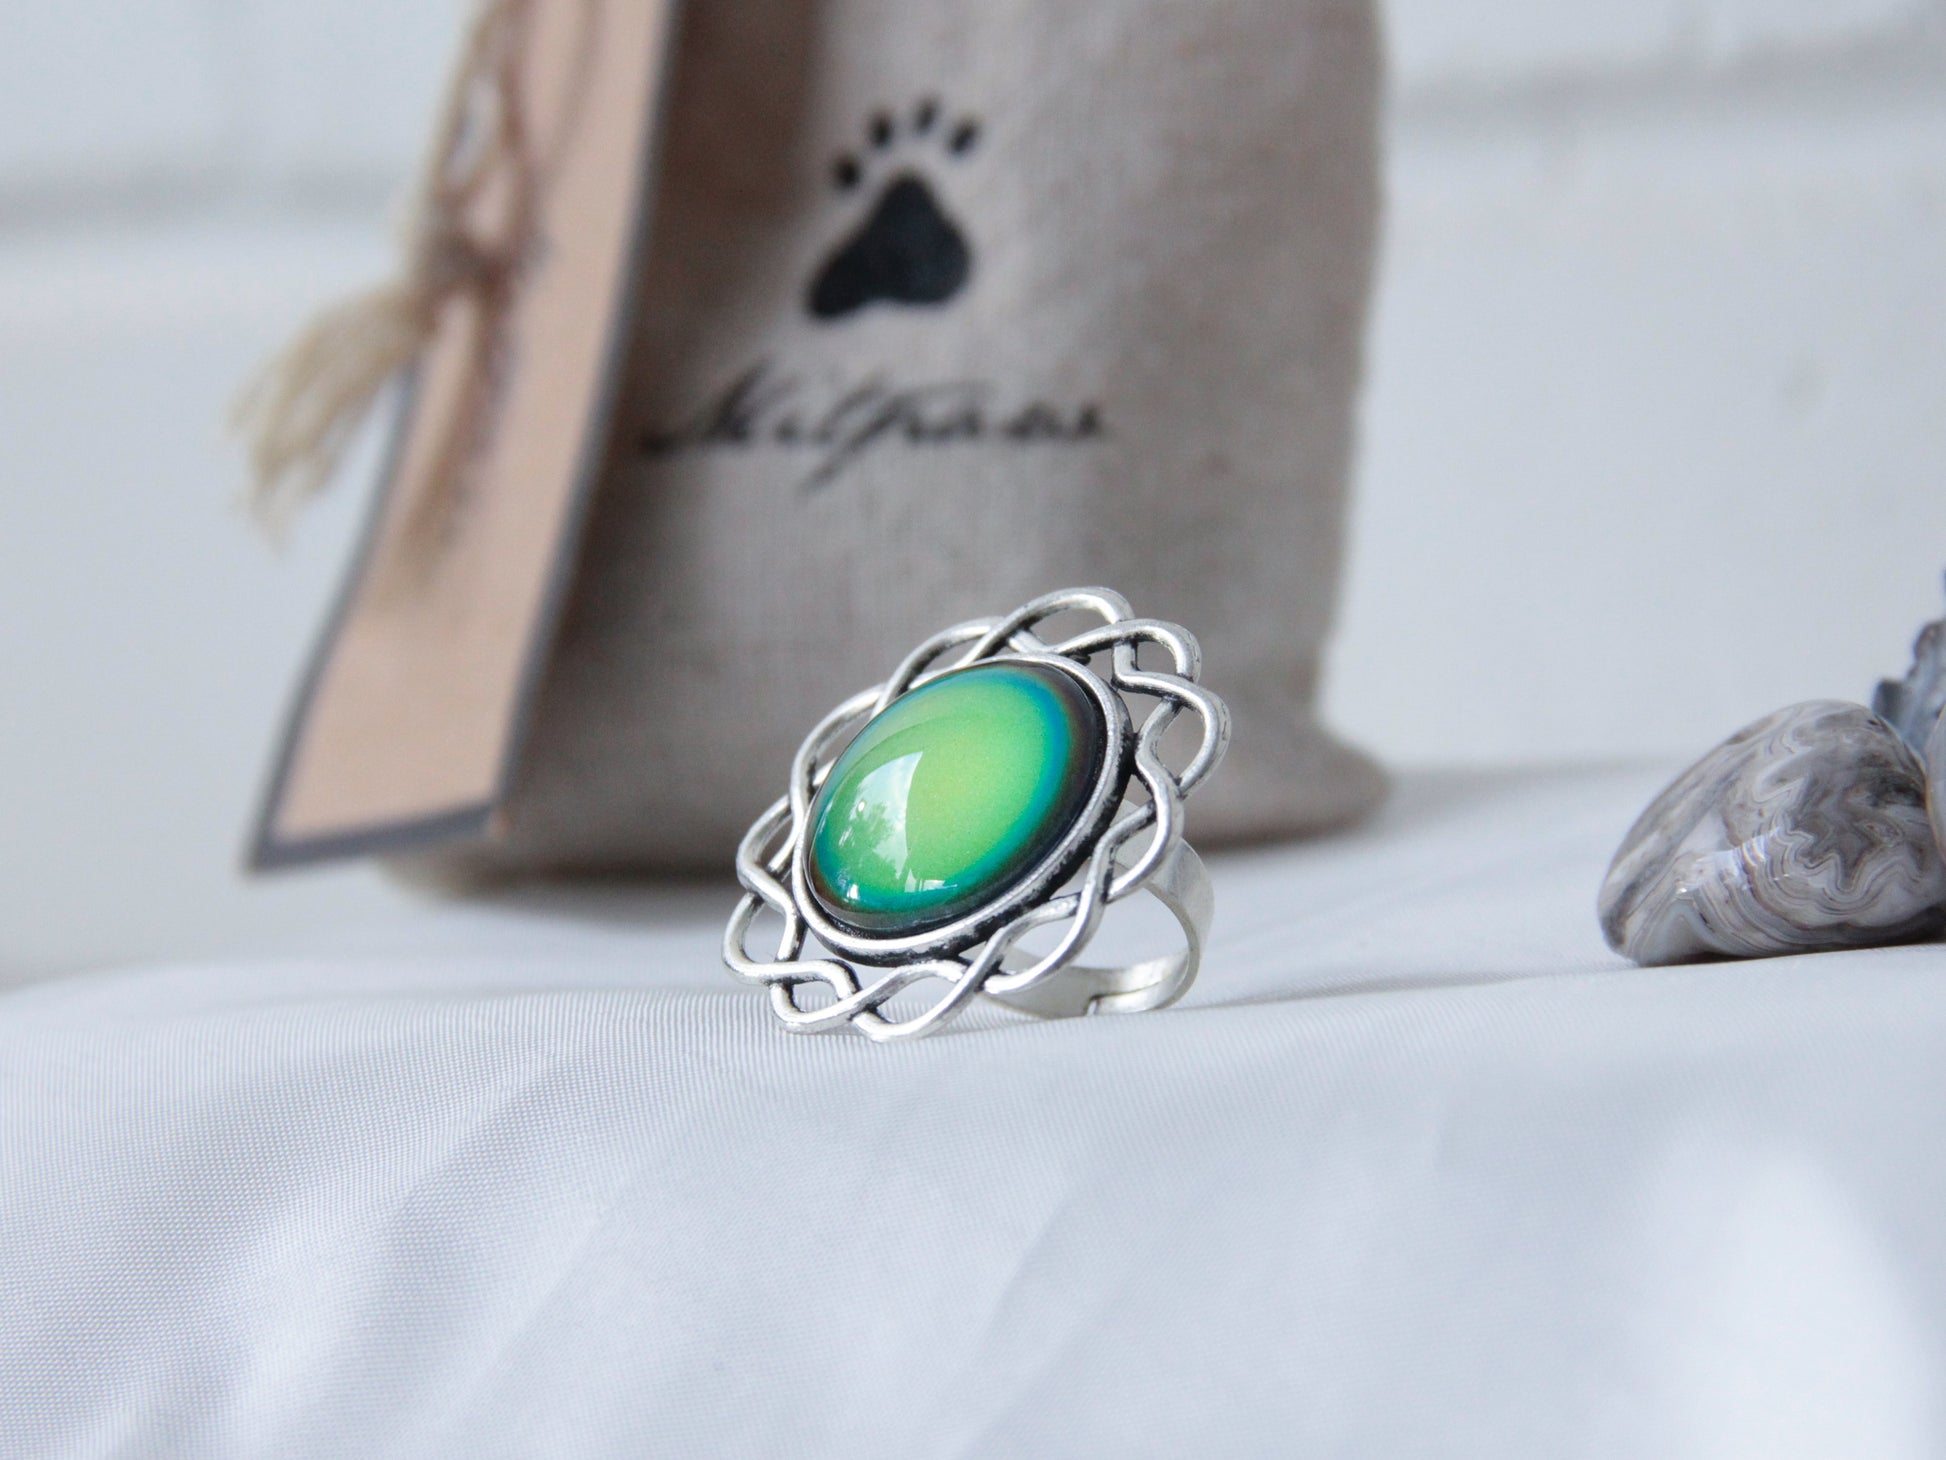 Weave Mood Ring with Iconic Features - Mitpaw